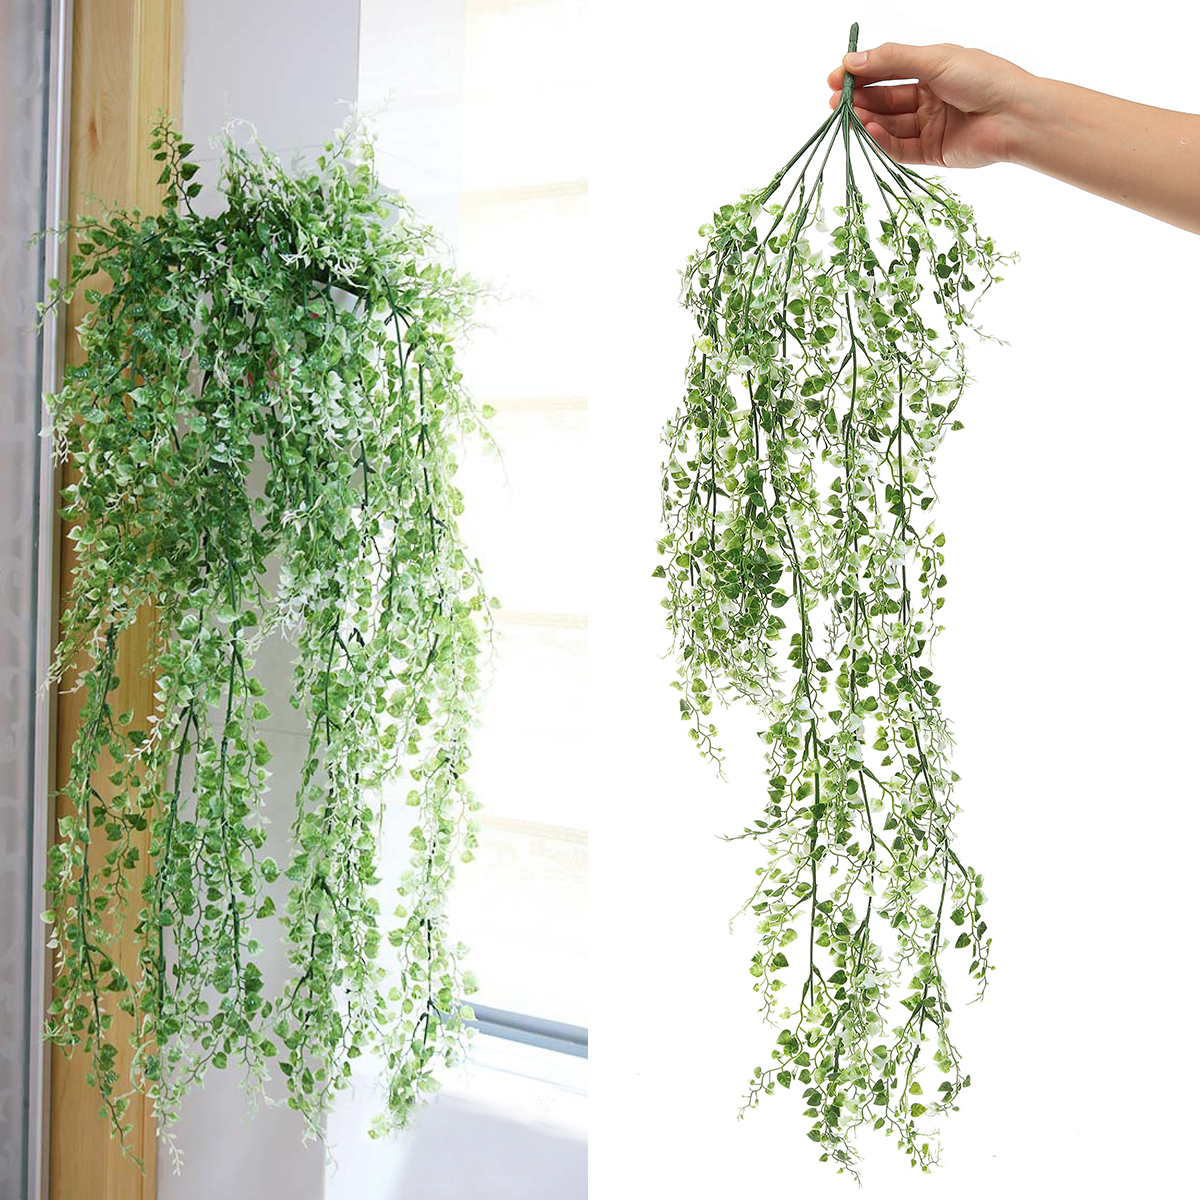 84cm-Artificial-Leaves-Vine-Green-Leaf-Rattan-Ivy-Ornaments-for-Wedding-Party-Decorations-1624711-4